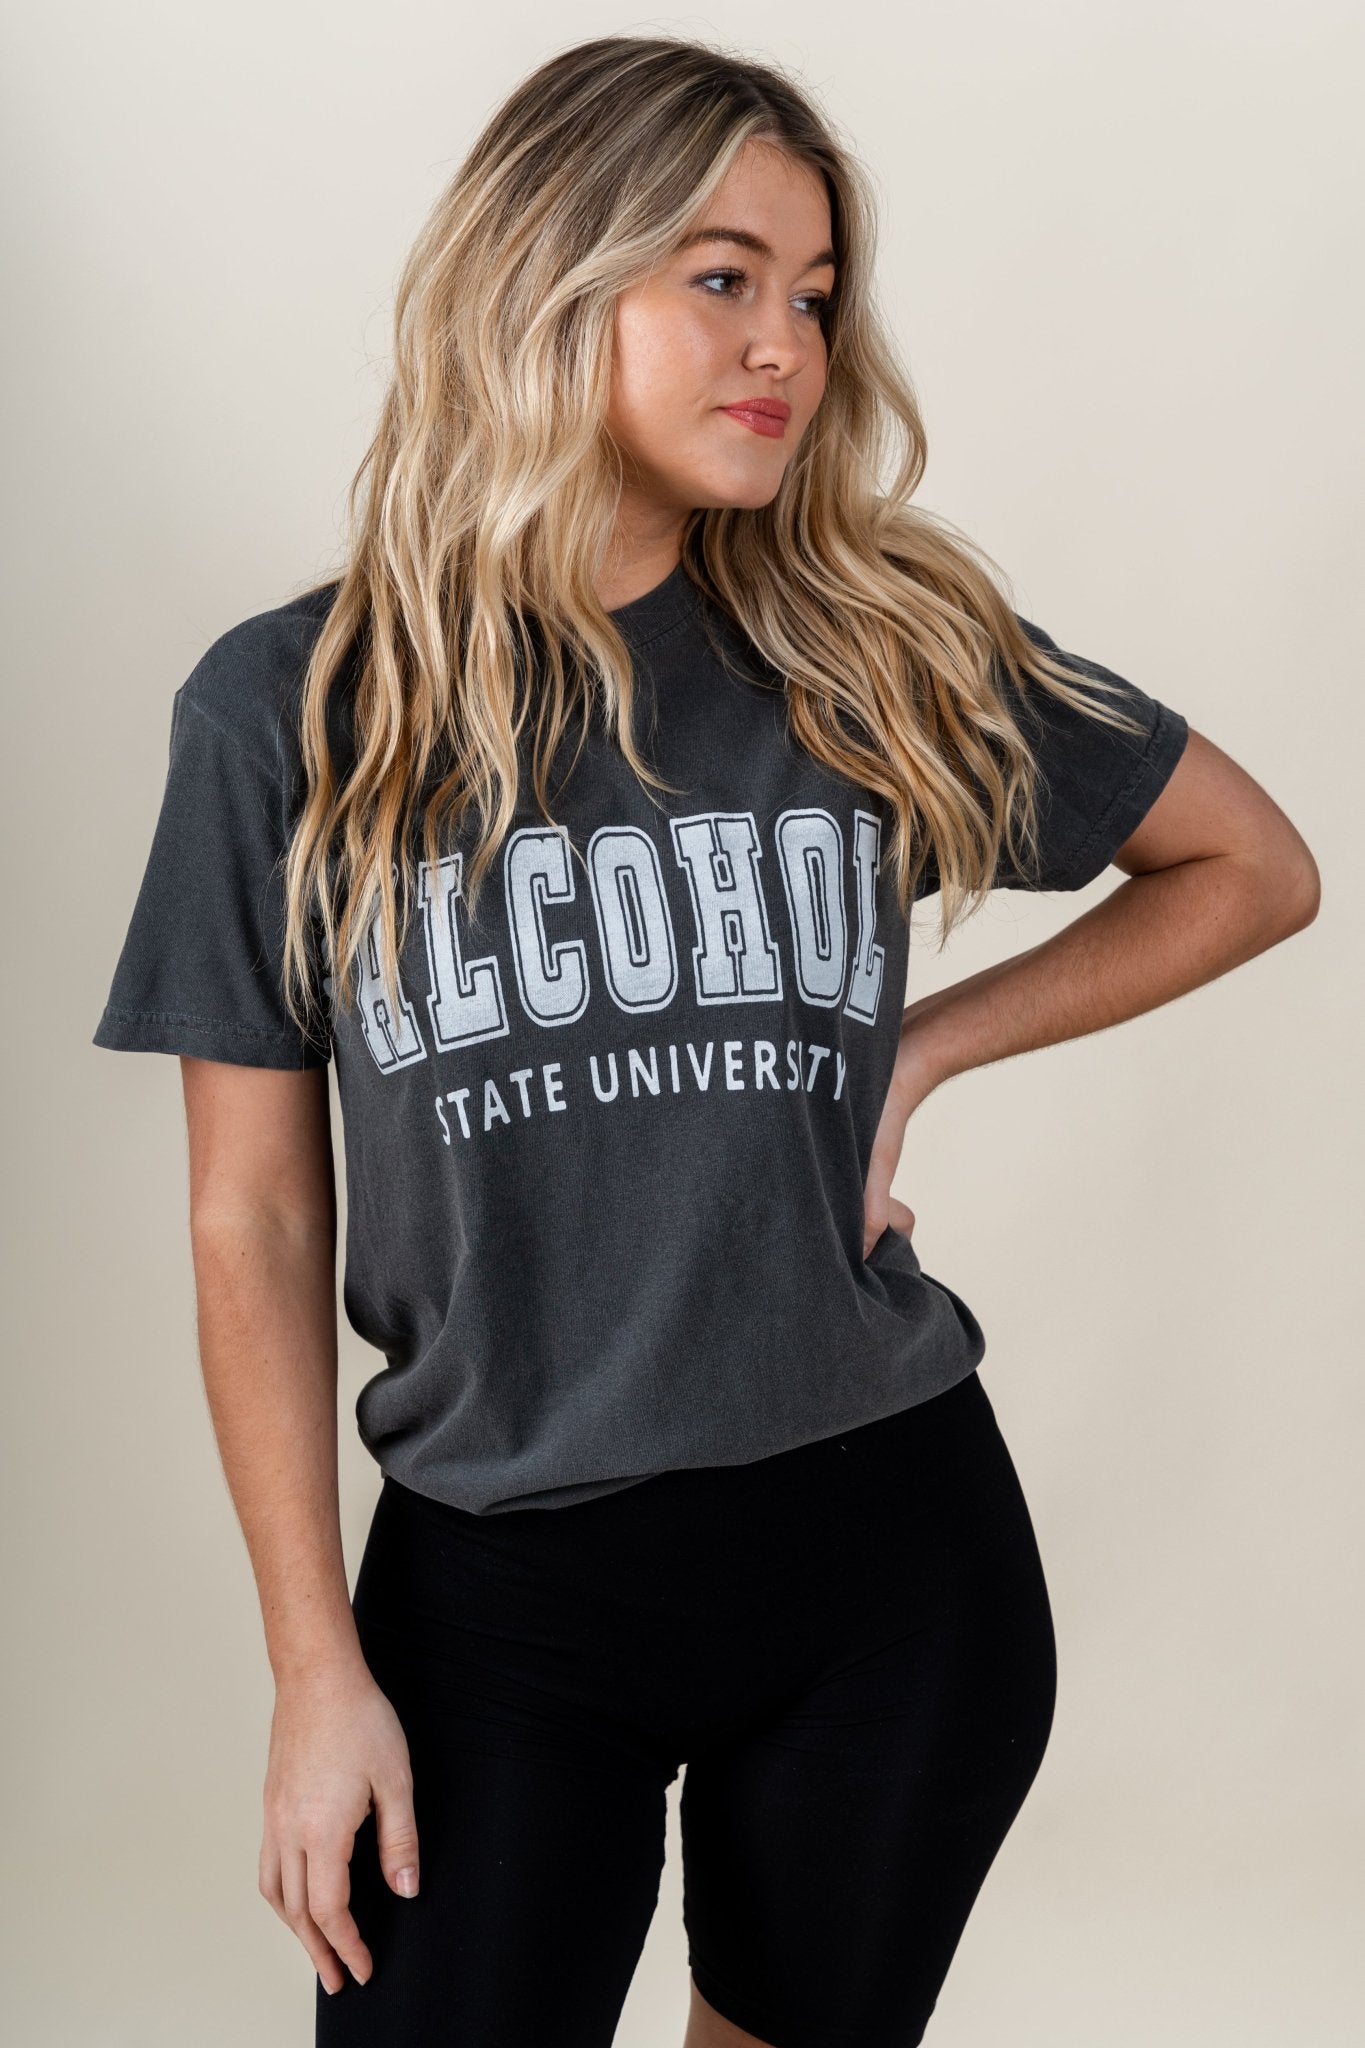 Alcohol state t-shirt grey - Affordable T-shirt - Boutique Graphic T-Shirts at Lush Fashion Lounge Boutique in Oklahoma City